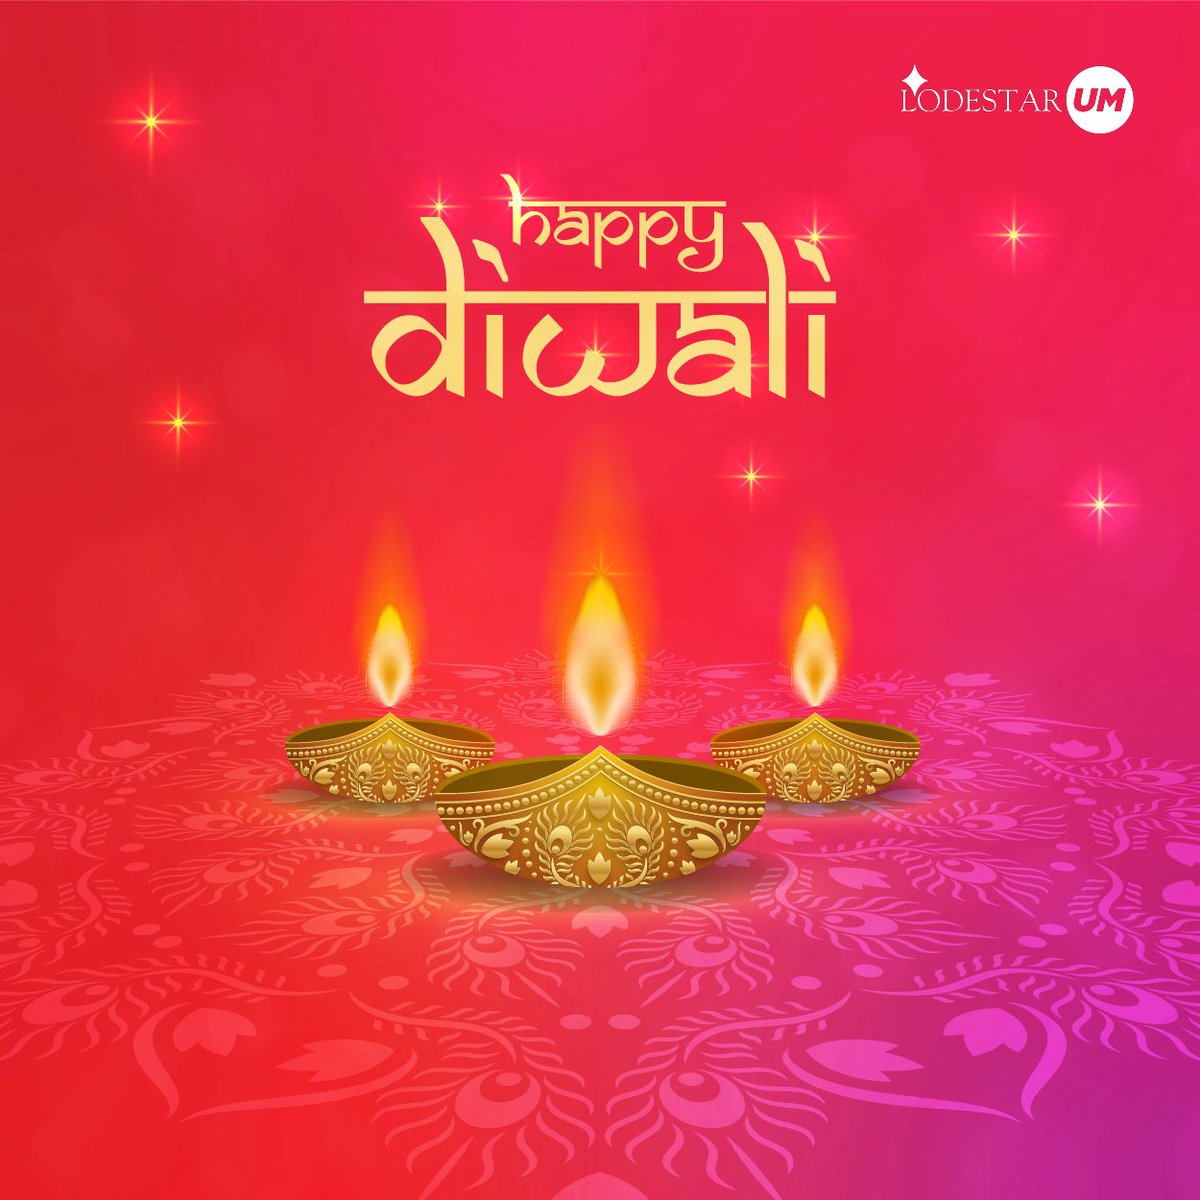 On behalf of every member of the Lodestar UM family, may your days ahead be as bright as the Diwali lamps, and our shared journey be filled with continuous victories and abundant happiness. Happy Diwali! 🪔